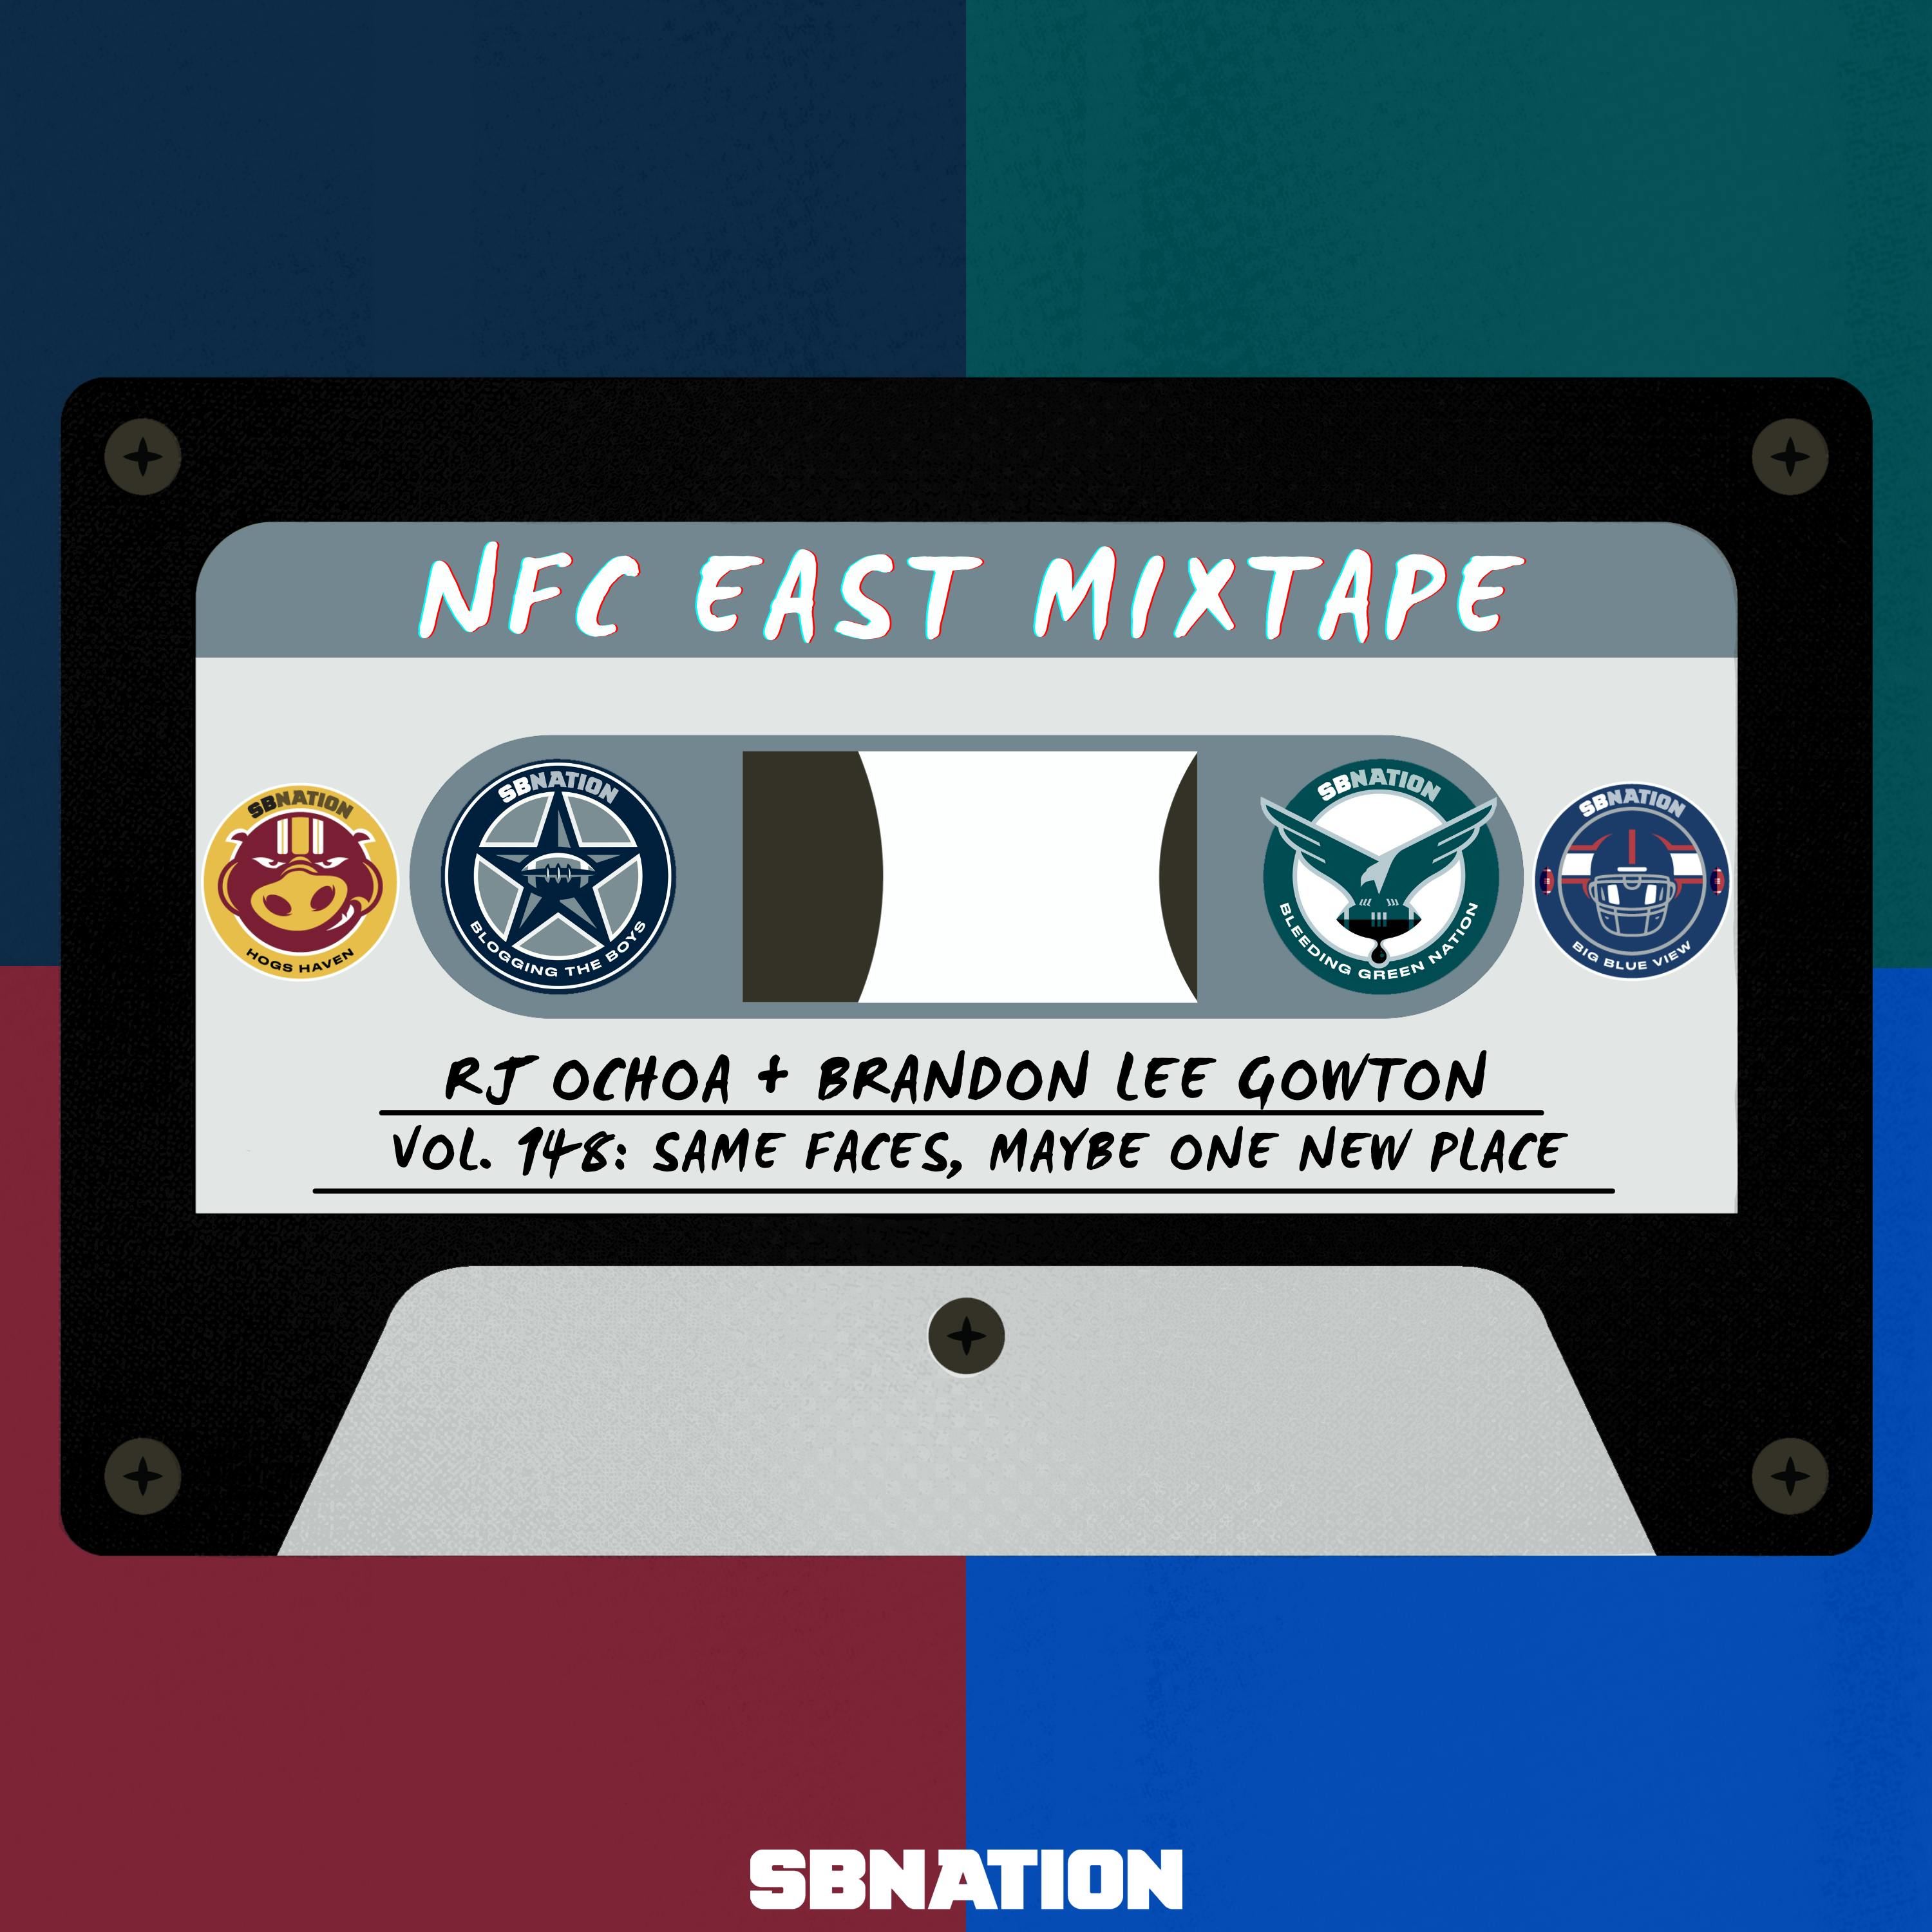 NFC East Mixtape Vol. 148: Same faces, maybe one new place